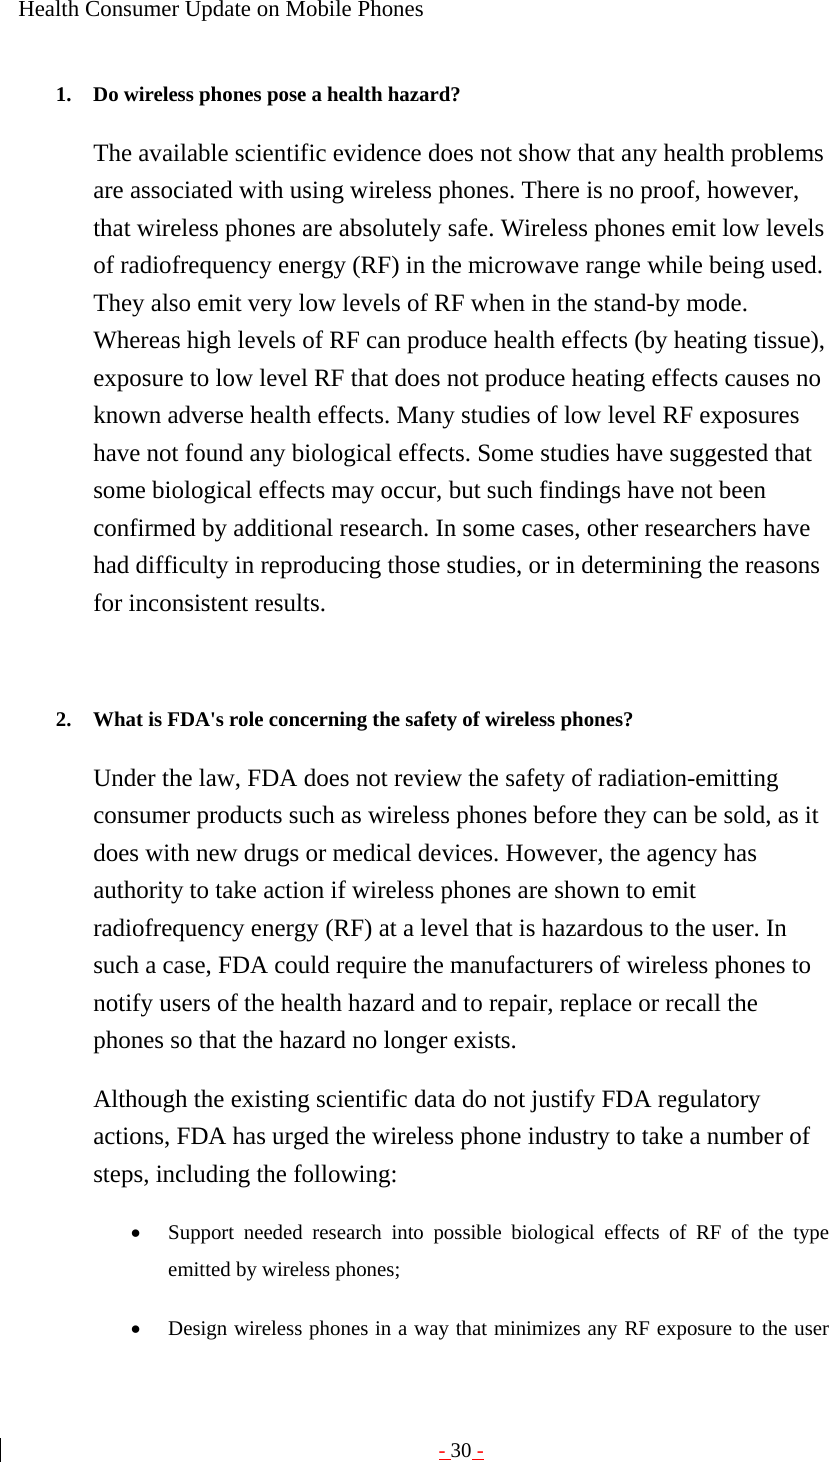 - 30 - Health Consumer Update on Mobile Phones  1. Do wireless phones pose a health hazard?   The available scientific evidence does not show that any health problems are associated with using wireless phones. There is no proof, however, that wireless phones are absolutely safe. Wireless phones emit low levels of radiofrequency energy (RF) in the microwave range while being used. They also emit very low levels of RF when in the stand-by mode. Whereas high levels of RF can produce health effects (by heating tissue), exposure to low level RF that does not produce heating effects causes no known adverse health effects. Many studies of low level RF exposures have not found any biological effects. Some studies have suggested that some biological effects may occur, but such findings have not been confirmed by additional research. In some cases, other researchers have had difficulty in reproducing those studies, or in determining the reasons for inconsistent results.   2. What is FDA&apos;s role concerning the safety of wireless phones?   Under the law, FDA does not review the safety of radiation-emitting consumer products such as wireless phones before they can be sold, as it does with new drugs or medical devices. However, the agency has authority to take action if wireless phones are shown to emit radiofrequency energy (RF) at a level that is hazardous to the user. In such a case, FDA could require the manufacturers of wireless phones to notify users of the health hazard and to repair, replace or recall the phones so that the hazard no longer exists. Although the existing scientific data do not justify FDA regulatory actions, FDA has urged the wireless phone industry to take a number of steps, including the following: • Support needed research into possible biological effects of RF of the type emitted by wireless phones;   • Design wireless phones in a way that minimizes any RF exposure to the user 